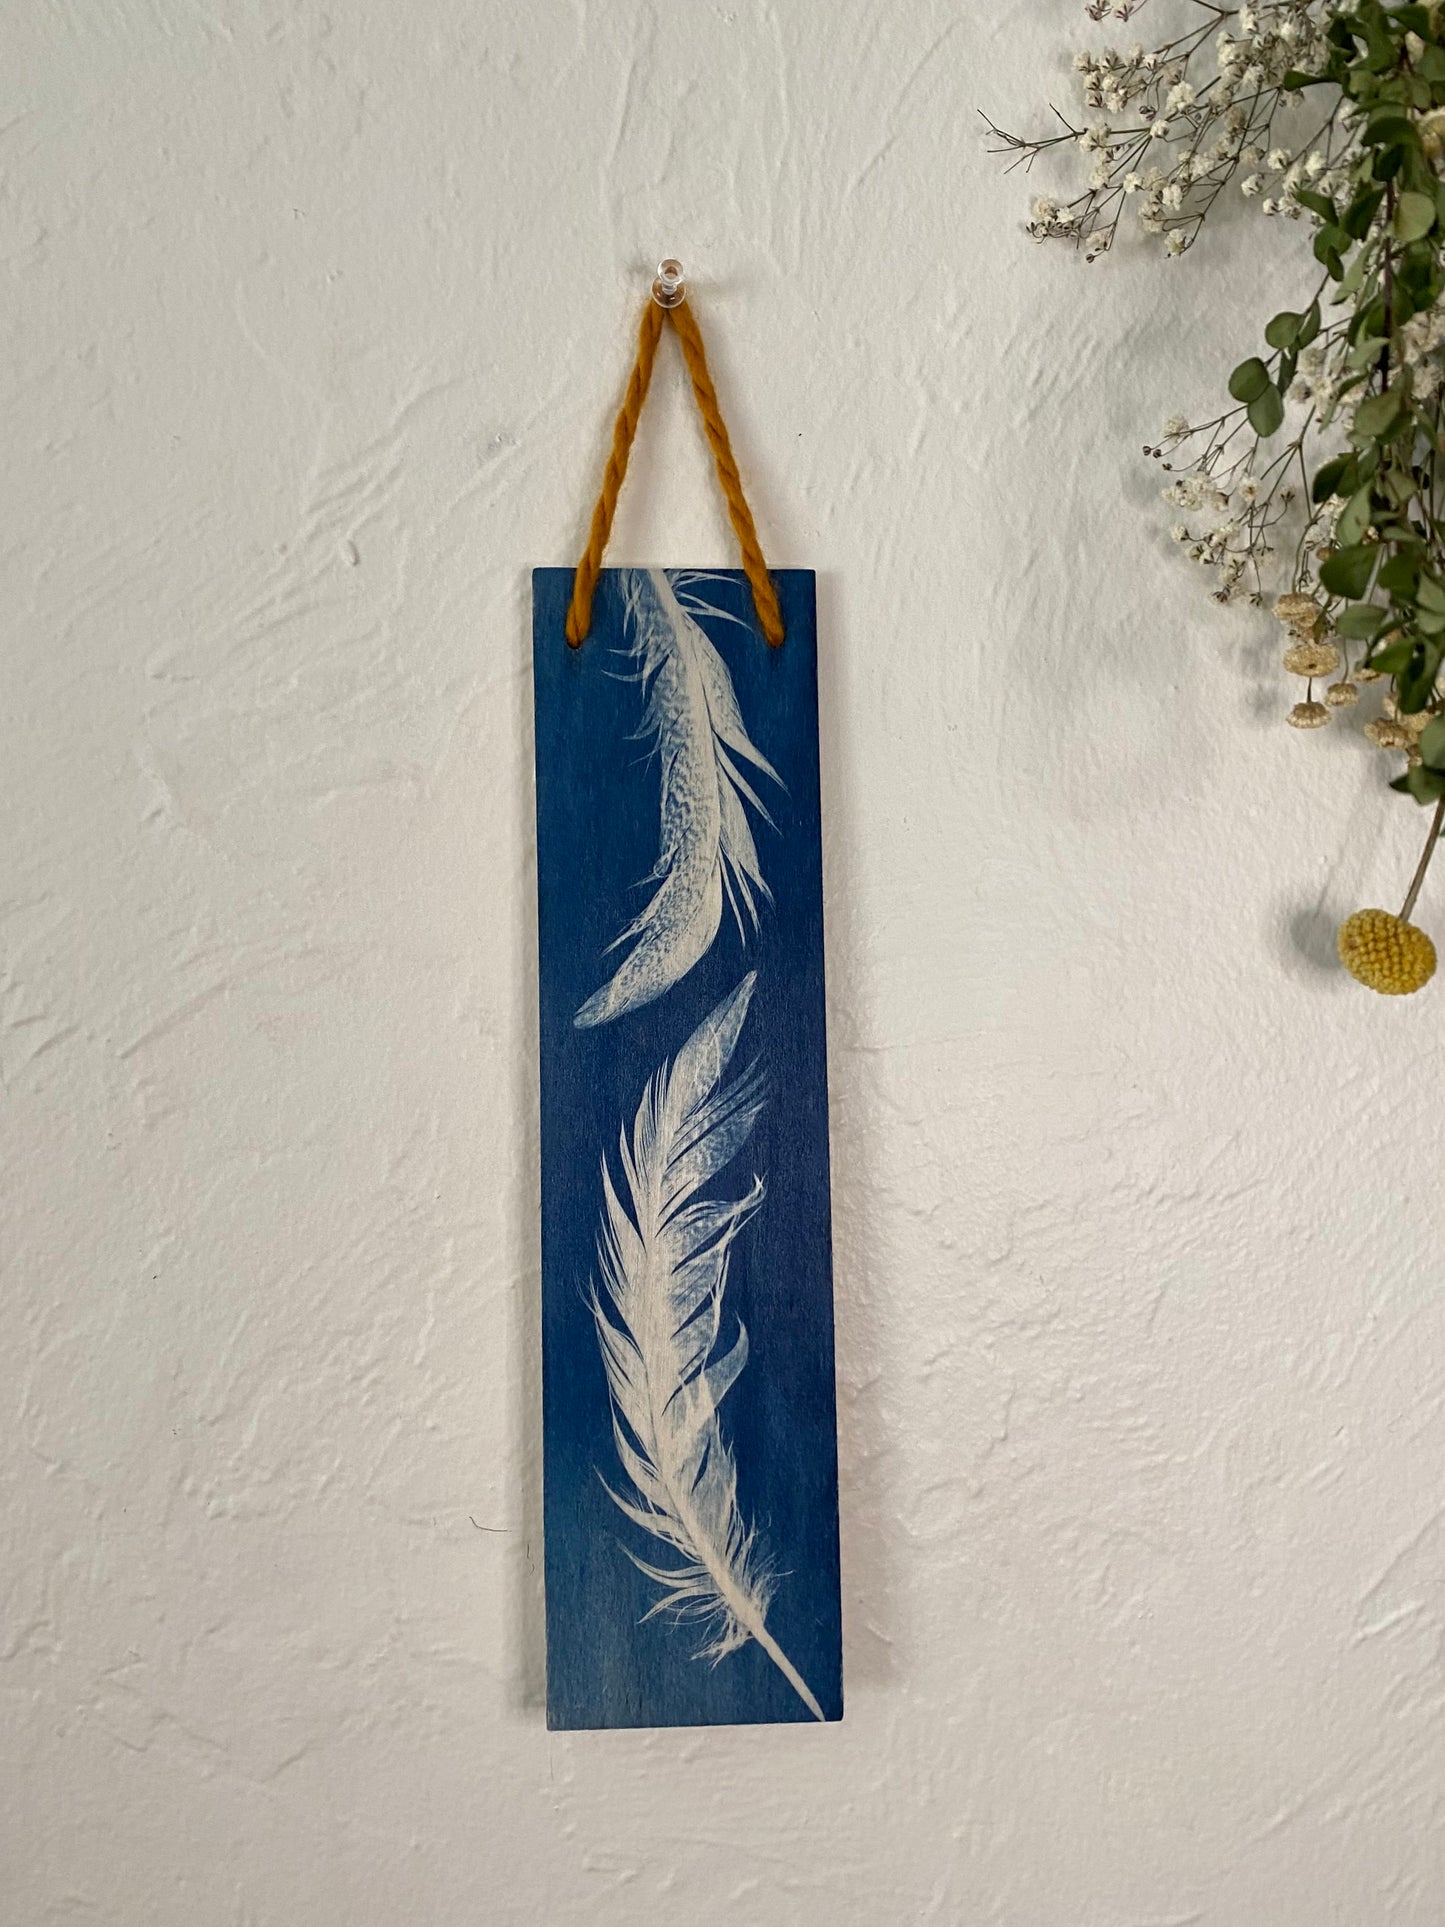 Two feathers on wood